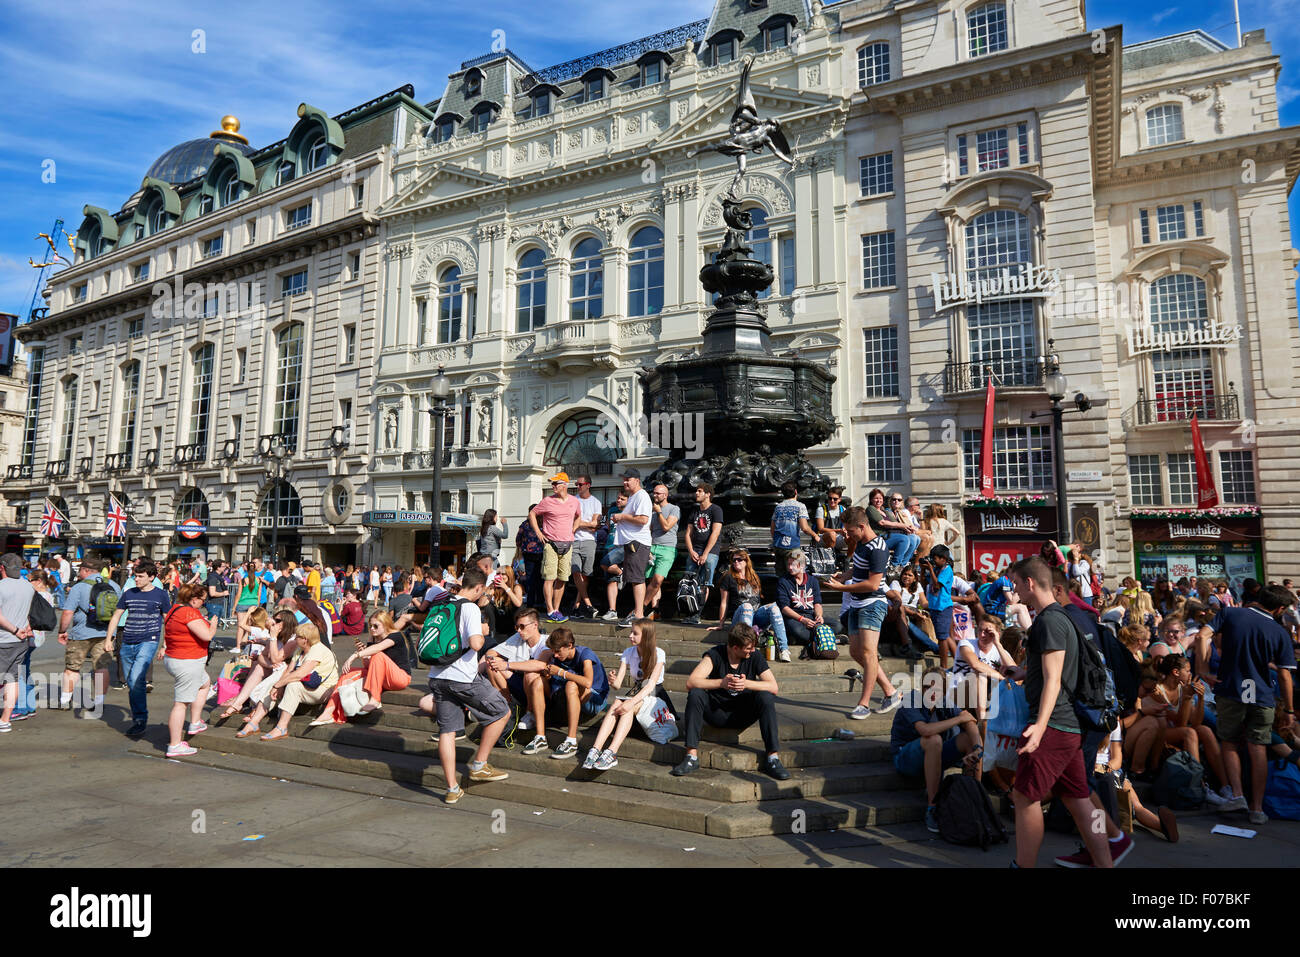 People around the Statue of Eros in Piccadilly Circus, London, United Kingdom, Europe Stock Photo